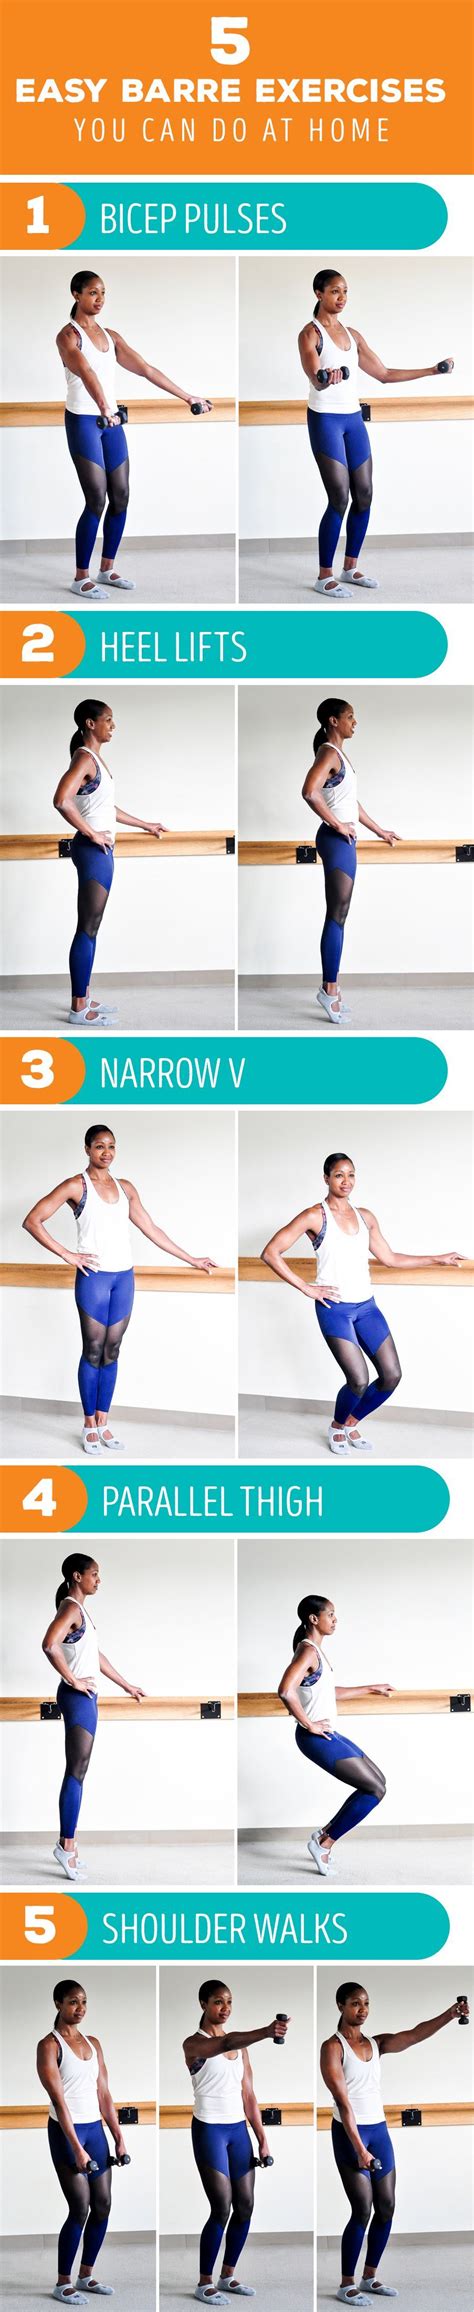 Try This Quick And Easy Barre Workout Routine For Toning That You Can